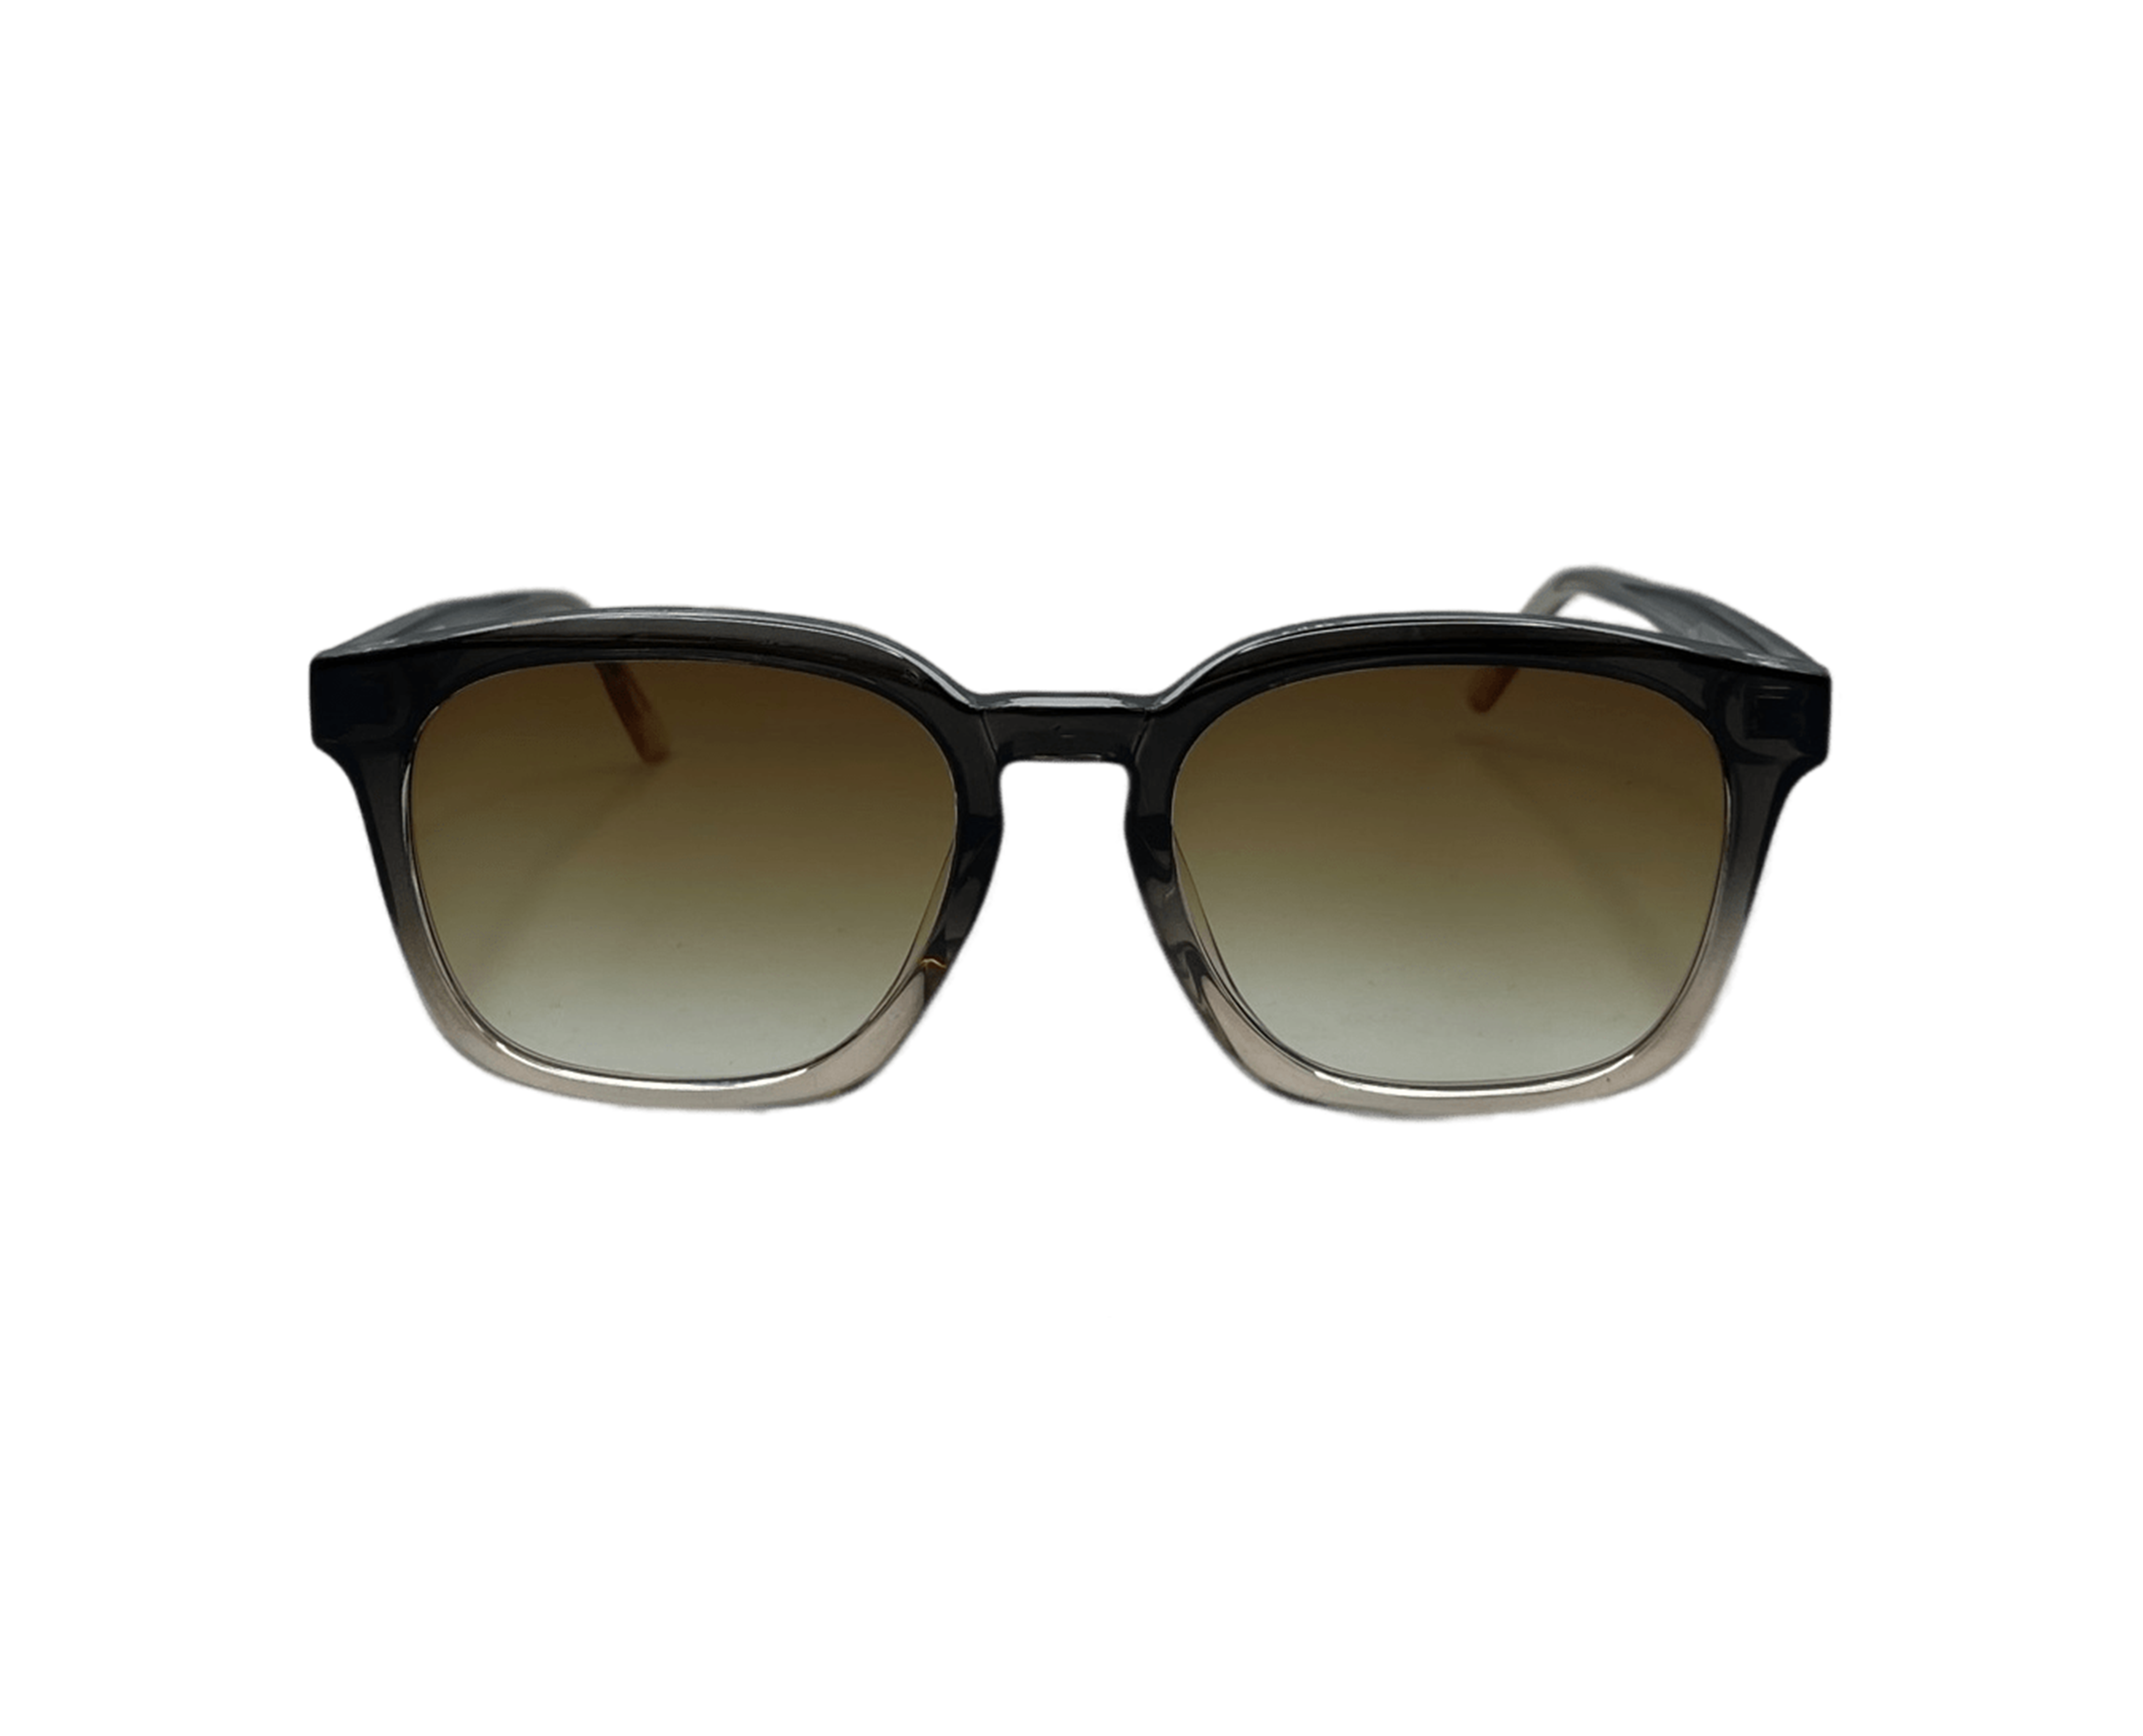 NS Deluxe - 8811 - Brown - Sunglasses